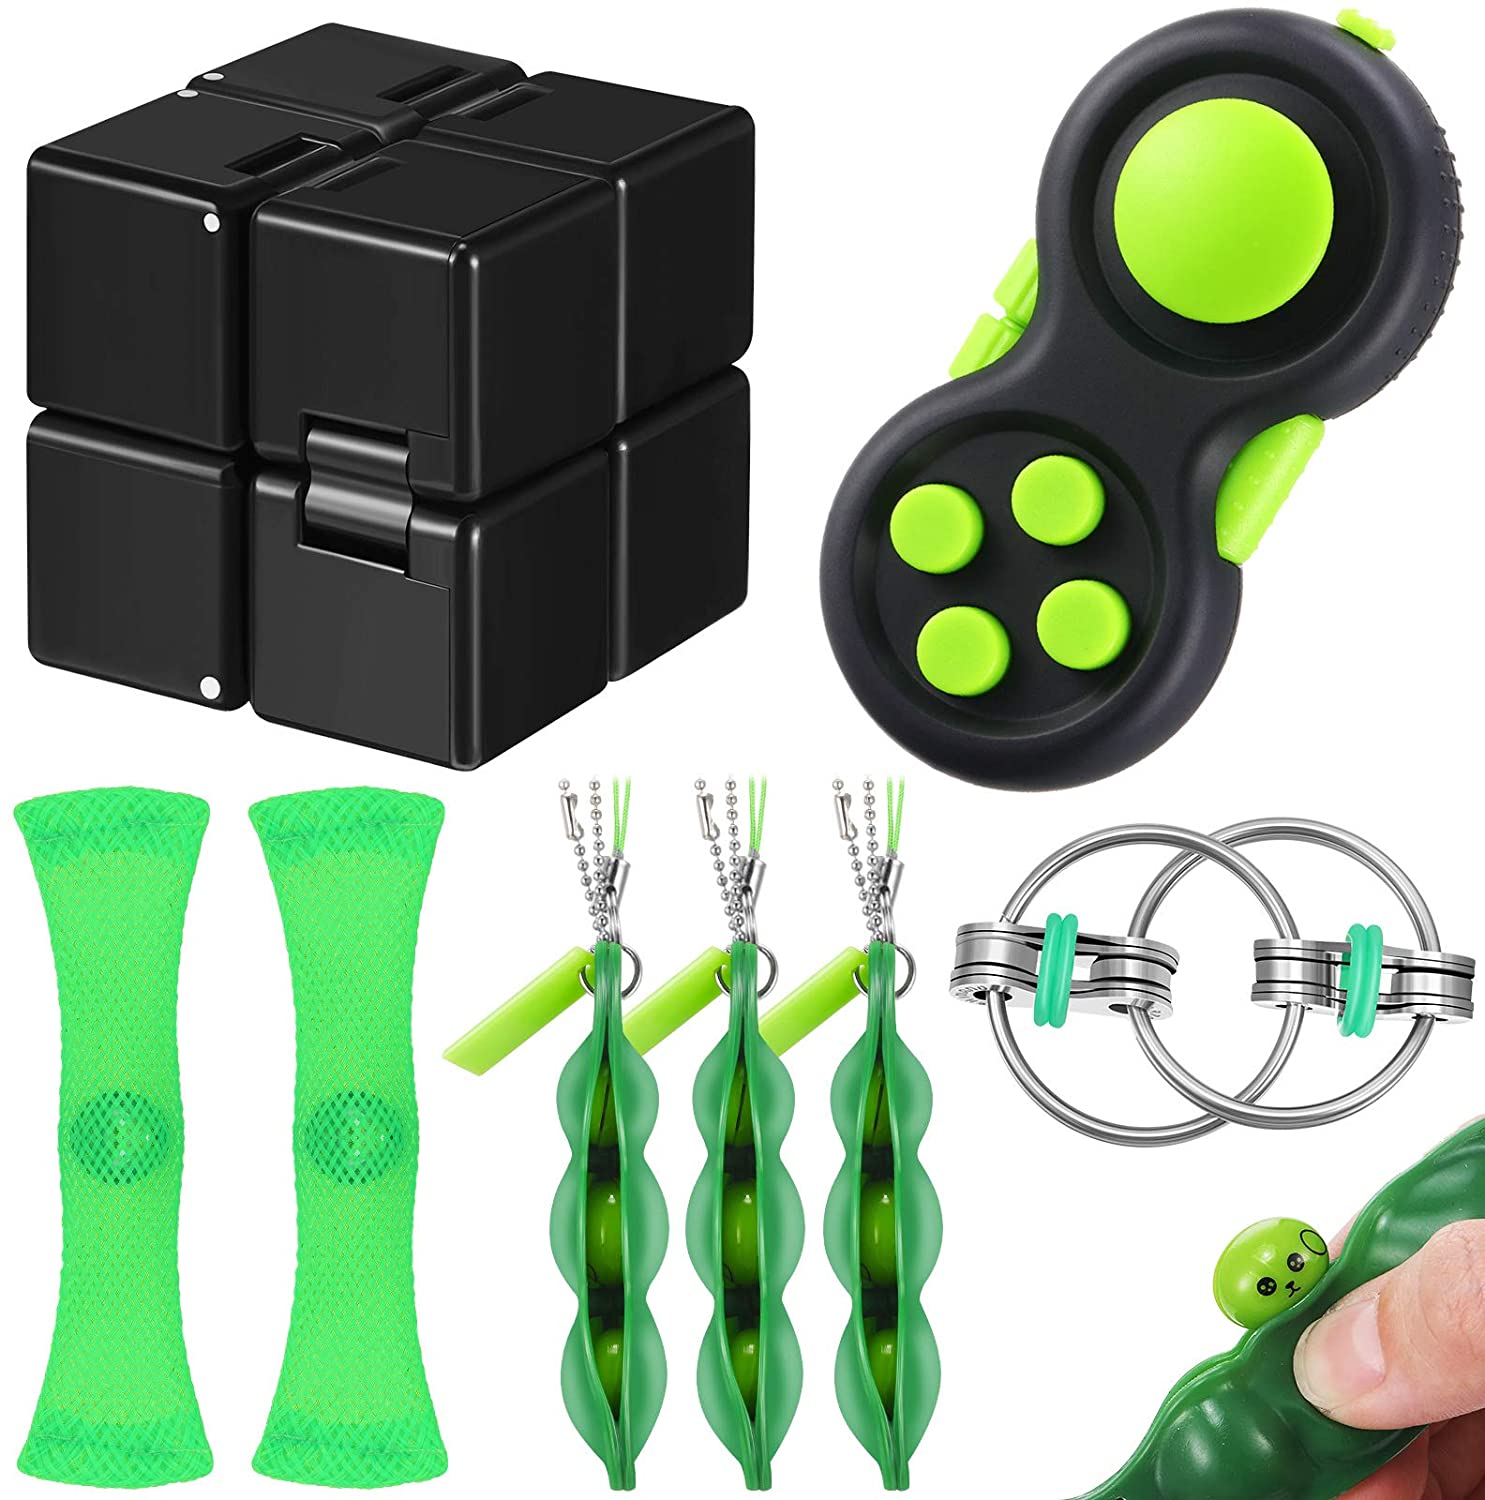 8 Pieces Handheld Fidget Toy Set Include Infinity Toy Cube Flippy Chain Fidget Controller Pad